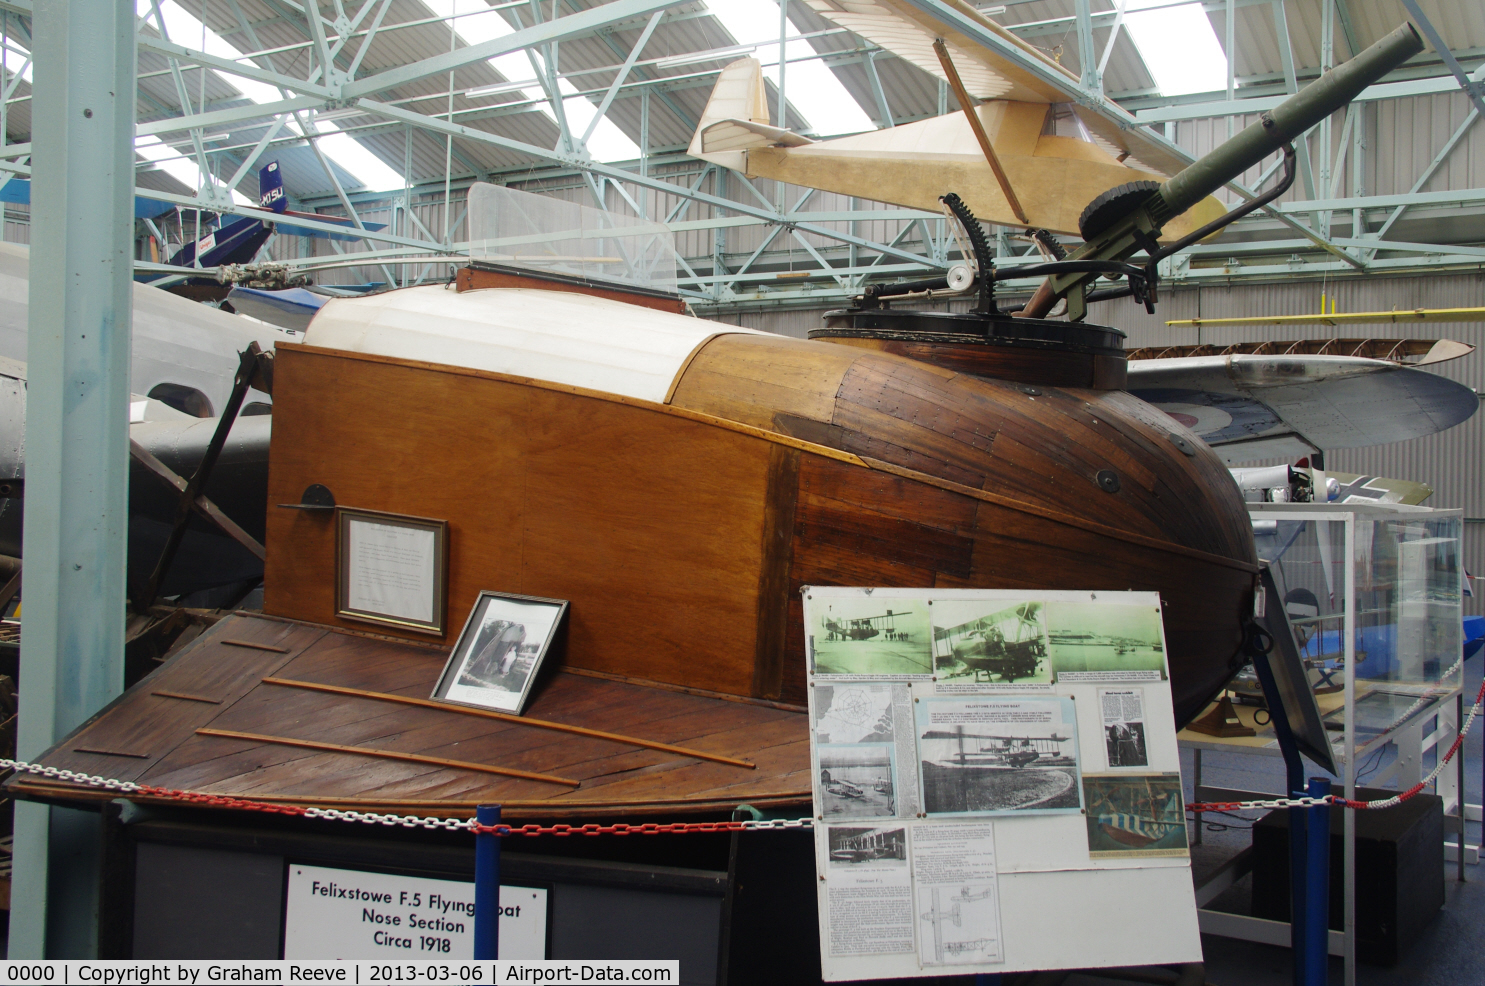 0000 Airport - Felixstowe F5 Flying Boat nose section circa 1918, preserved at the Norfolk and Suffolk Aviation Museum, Flixton. 